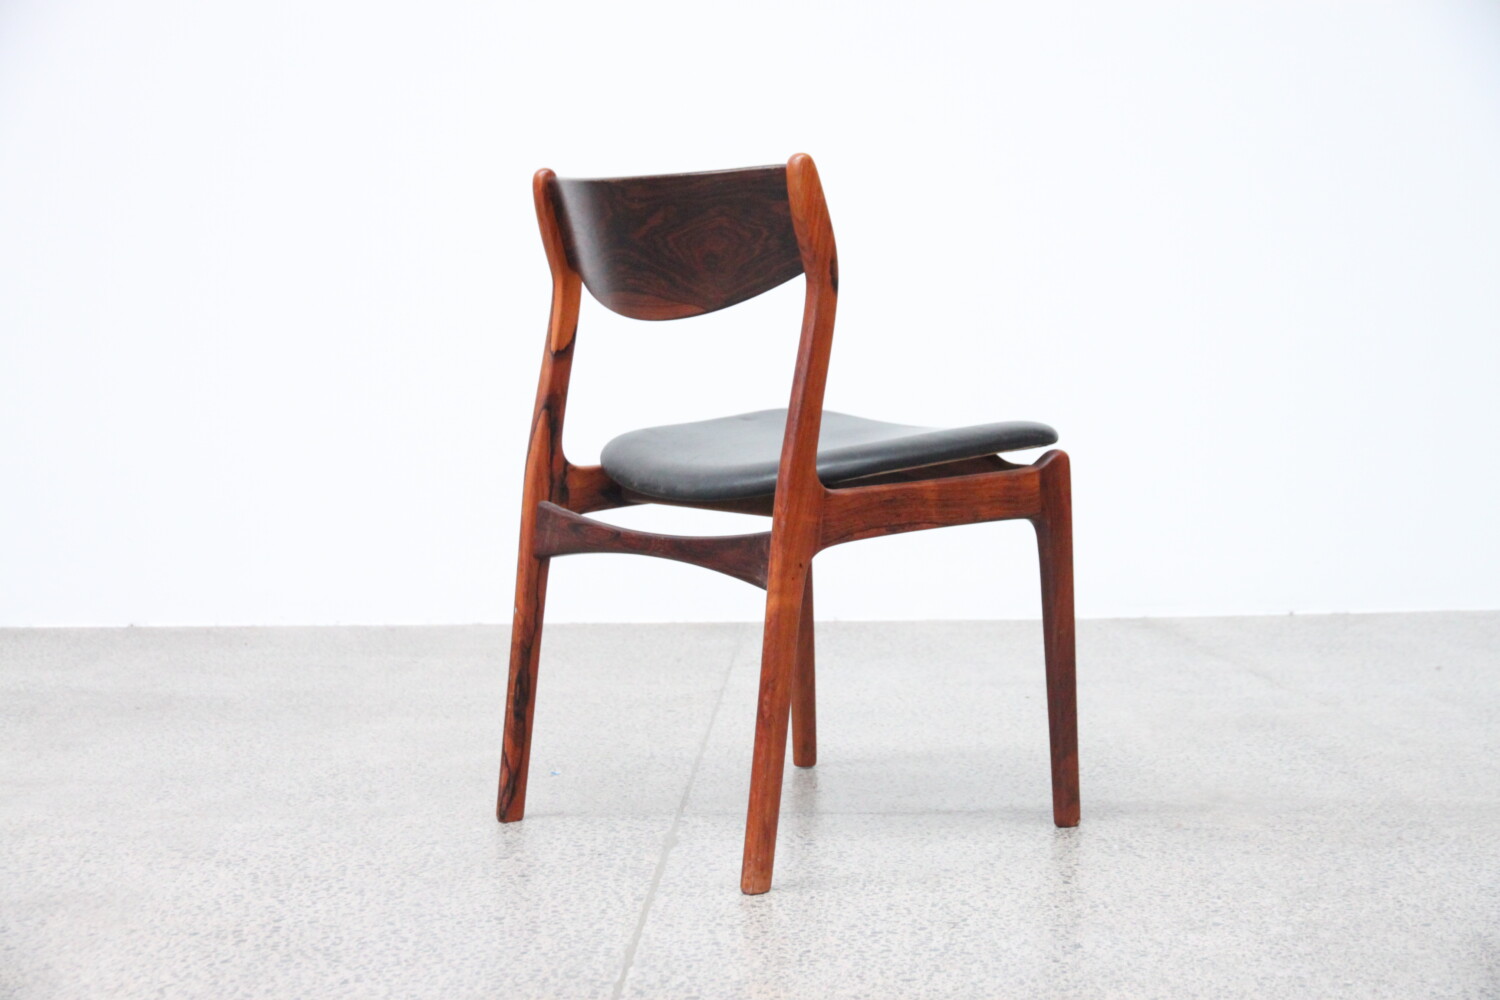 Rosewood Dining Chairs x4 by P.E Jorgensen